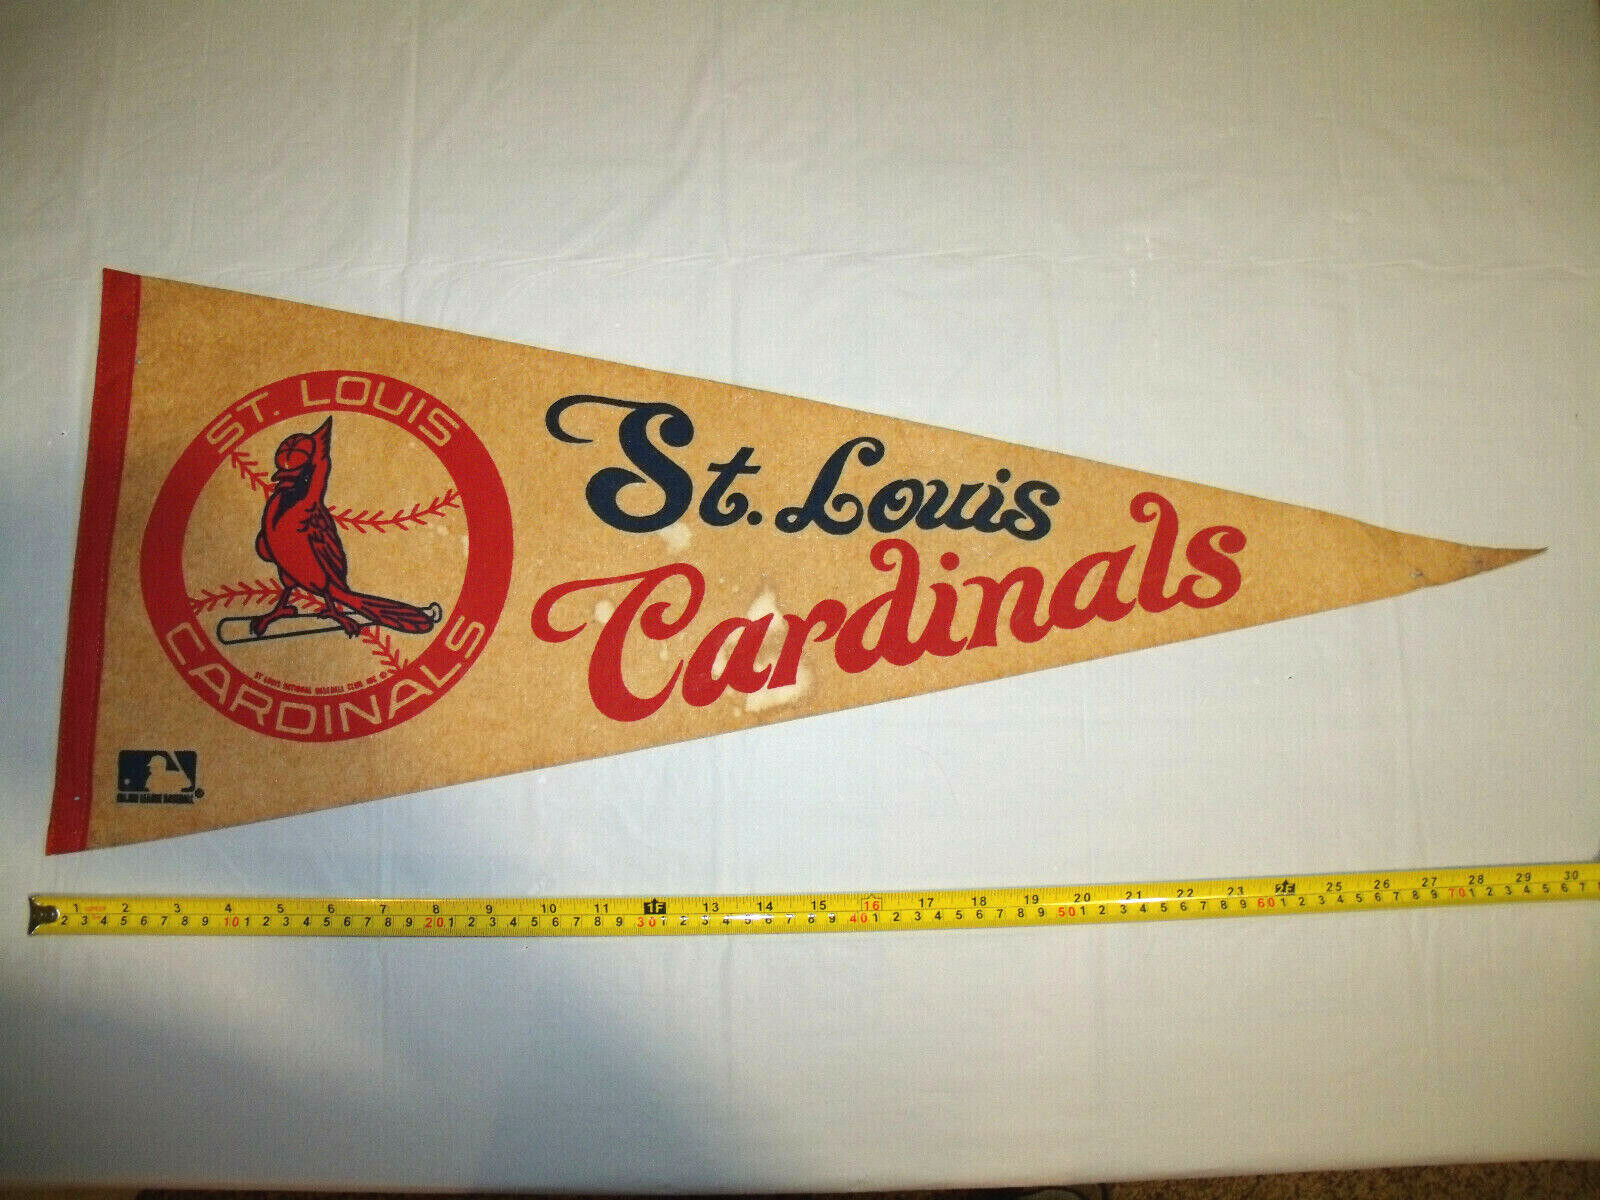 St. Louis Cardinals Original 1970s Vintage Full Size Pennant Very Yellowed